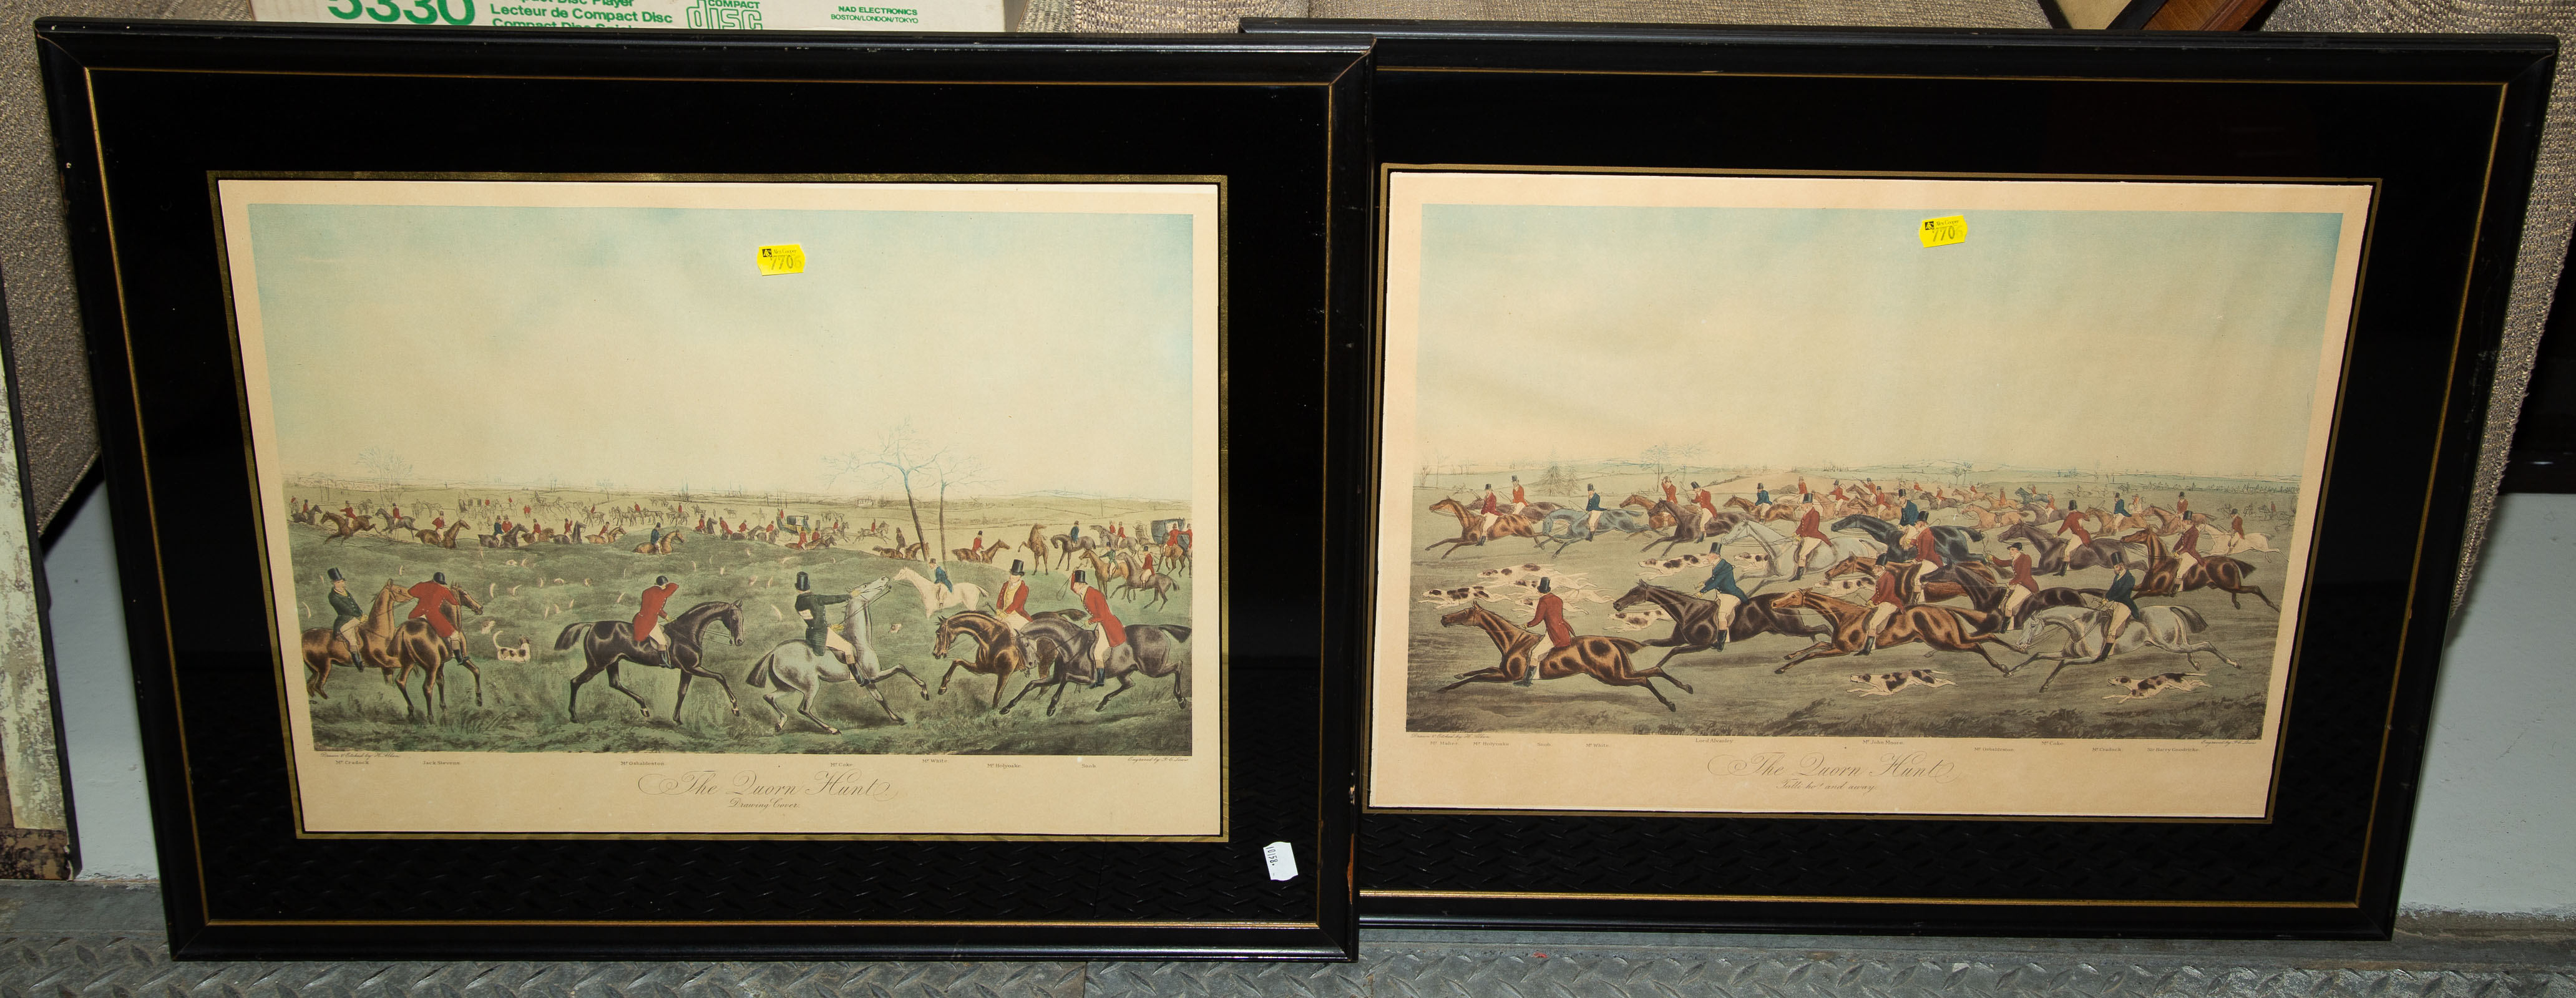 TWO FRAMED FOX HUNTING SCENES  28983a